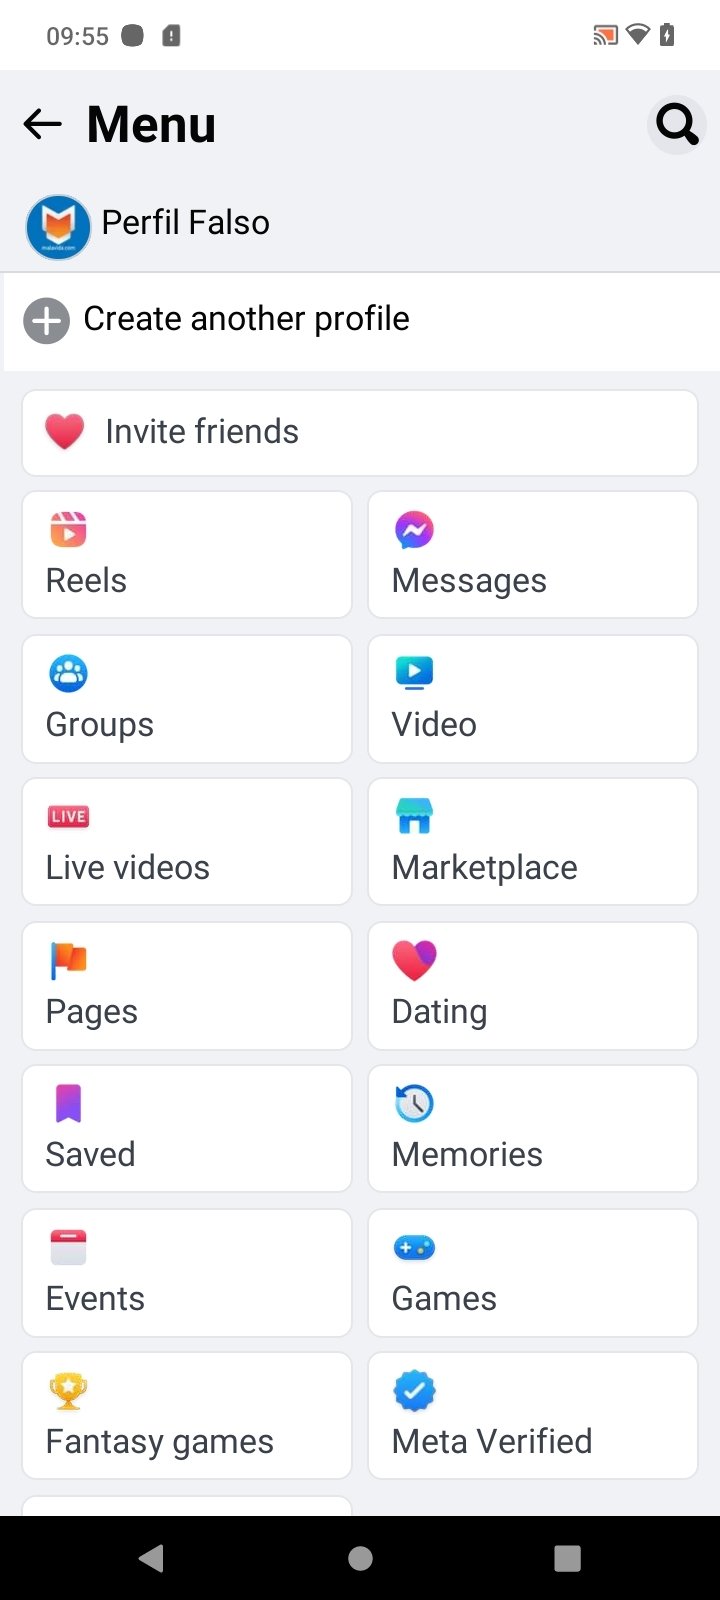 facebook lite apk download for android mobile